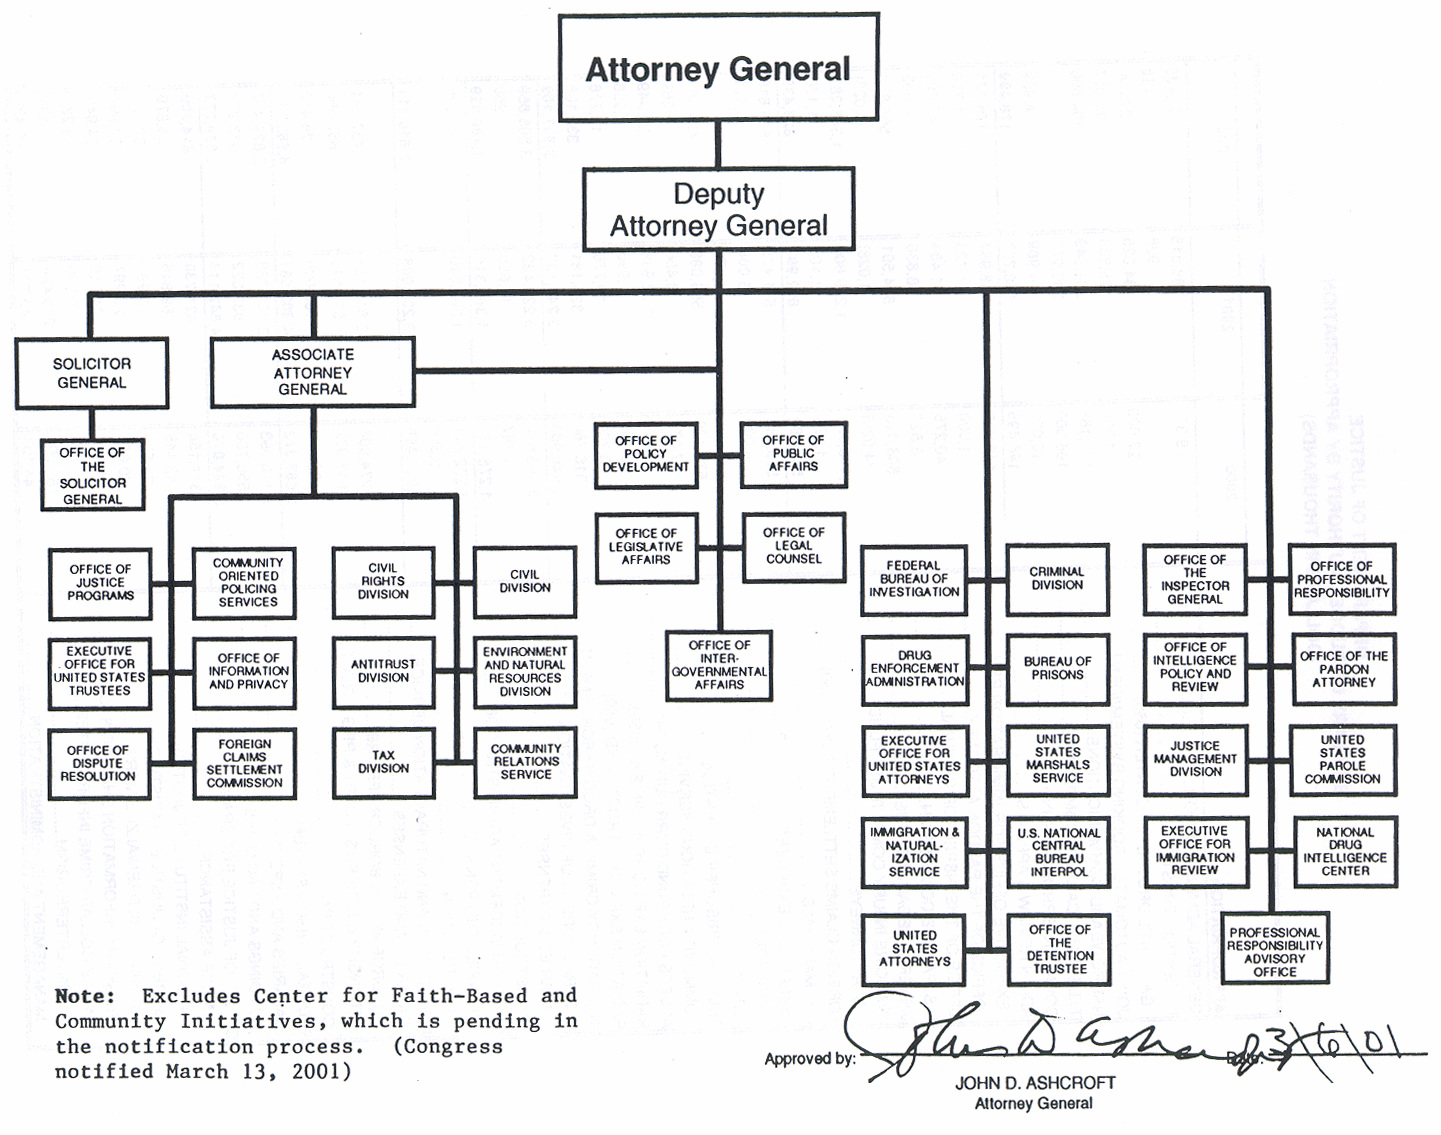 US Department of Justice Organization Chart